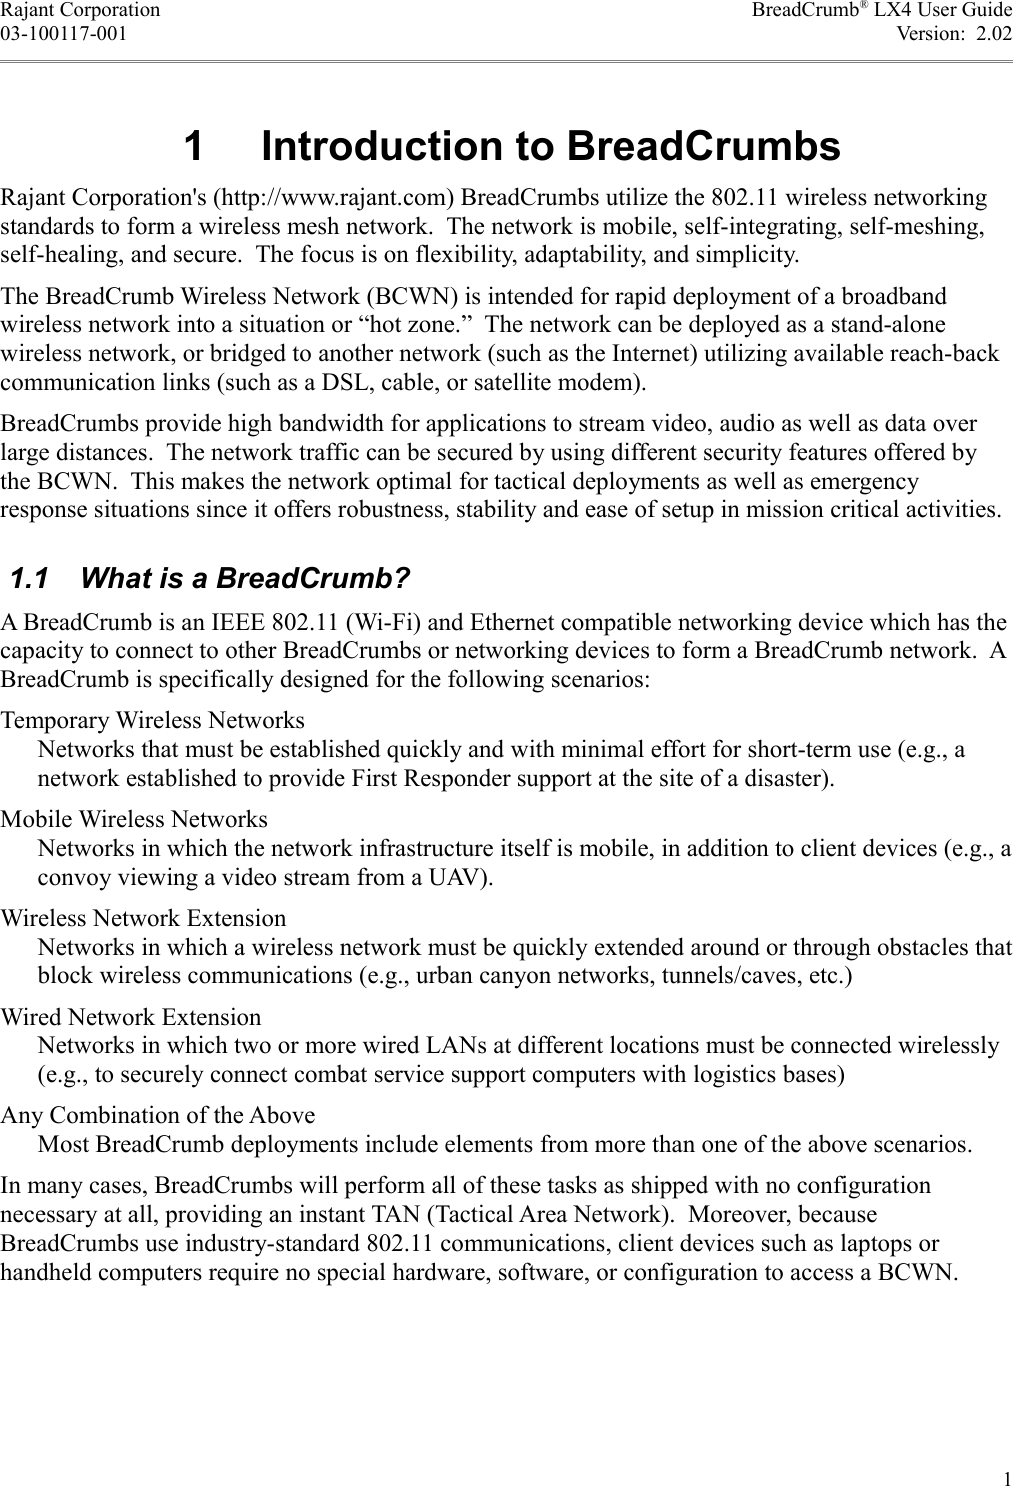 Rajant Corporation BreadCrumb® LX4 User Guide03-100117-001 Version:  2.02 1  Introduction to BreadCrumbsRajant Corporation&apos;s (http://www.rajant.com) BreadCrumbs utilize the 802.11 wireless networking standards to form a wireless mesh network.  The network is mobile, self-integrating, self-meshing, self-healing, and secure.  The focus is on flexibility, adaptability, and simplicity.The BreadCrumb Wireless Network (BCWN) is intended for rapid deployment of a broadband wireless network into a situation or “hot zone.”  The network can be deployed as a stand-alone wireless network, or bridged to another network (such as the Internet) utilizing available reach-back communication links (such as a DSL, cable, or satellite modem).BreadCrumbs provide high bandwidth for applications to stream video, audio as well as data over large distances.  The network traffic can be secured by using different security features offered by the BCWN.  This makes the network optimal for tactical deployments as well as emergency response situations since it offers robustness, stability and ease of setup in mission critical activities. 1.1  What is a BreadCrumb?A BreadCrumb is an IEEE 802.11 (Wi-Fi) and Ethernet compatible networking device which has the capacity to connect to other BreadCrumbs or networking devices to form a BreadCrumb network.  A BreadCrumb is specifically designed for the following scenarios:Temporary Wireless NetworksNetworks that must be established quickly and with minimal effort for short-term use (e.g., a network established to provide First Responder support at the site of a disaster).Mobile Wireless NetworksNetworks in which the network infrastructure itself is mobile, in addition to client devices (e.g., a convoy viewing a video stream from a UAV).Wireless Network ExtensionNetworks in which a wireless network must be quickly extended around or through obstacles that block wireless communications (e.g., urban canyon networks, tunnels/caves, etc.)Wired Network ExtensionNetworks in which two or more wired LANs at different locations must be connected wirelessly (e.g., to securely connect combat service support computers with logistics bases)Any Combination of the AboveMost BreadCrumb deployments include elements from more than one of the above scenarios.In many cases, BreadCrumbs will perform all of these tasks as shipped with no configuration necessary at all, providing an instant TAN (Tactical Area Network).  Moreover, because BreadCrumbs use industry-standard 802.11 communications, client devices such as laptops or handheld computers require no special hardware, software, or configuration to access a BCWN.1